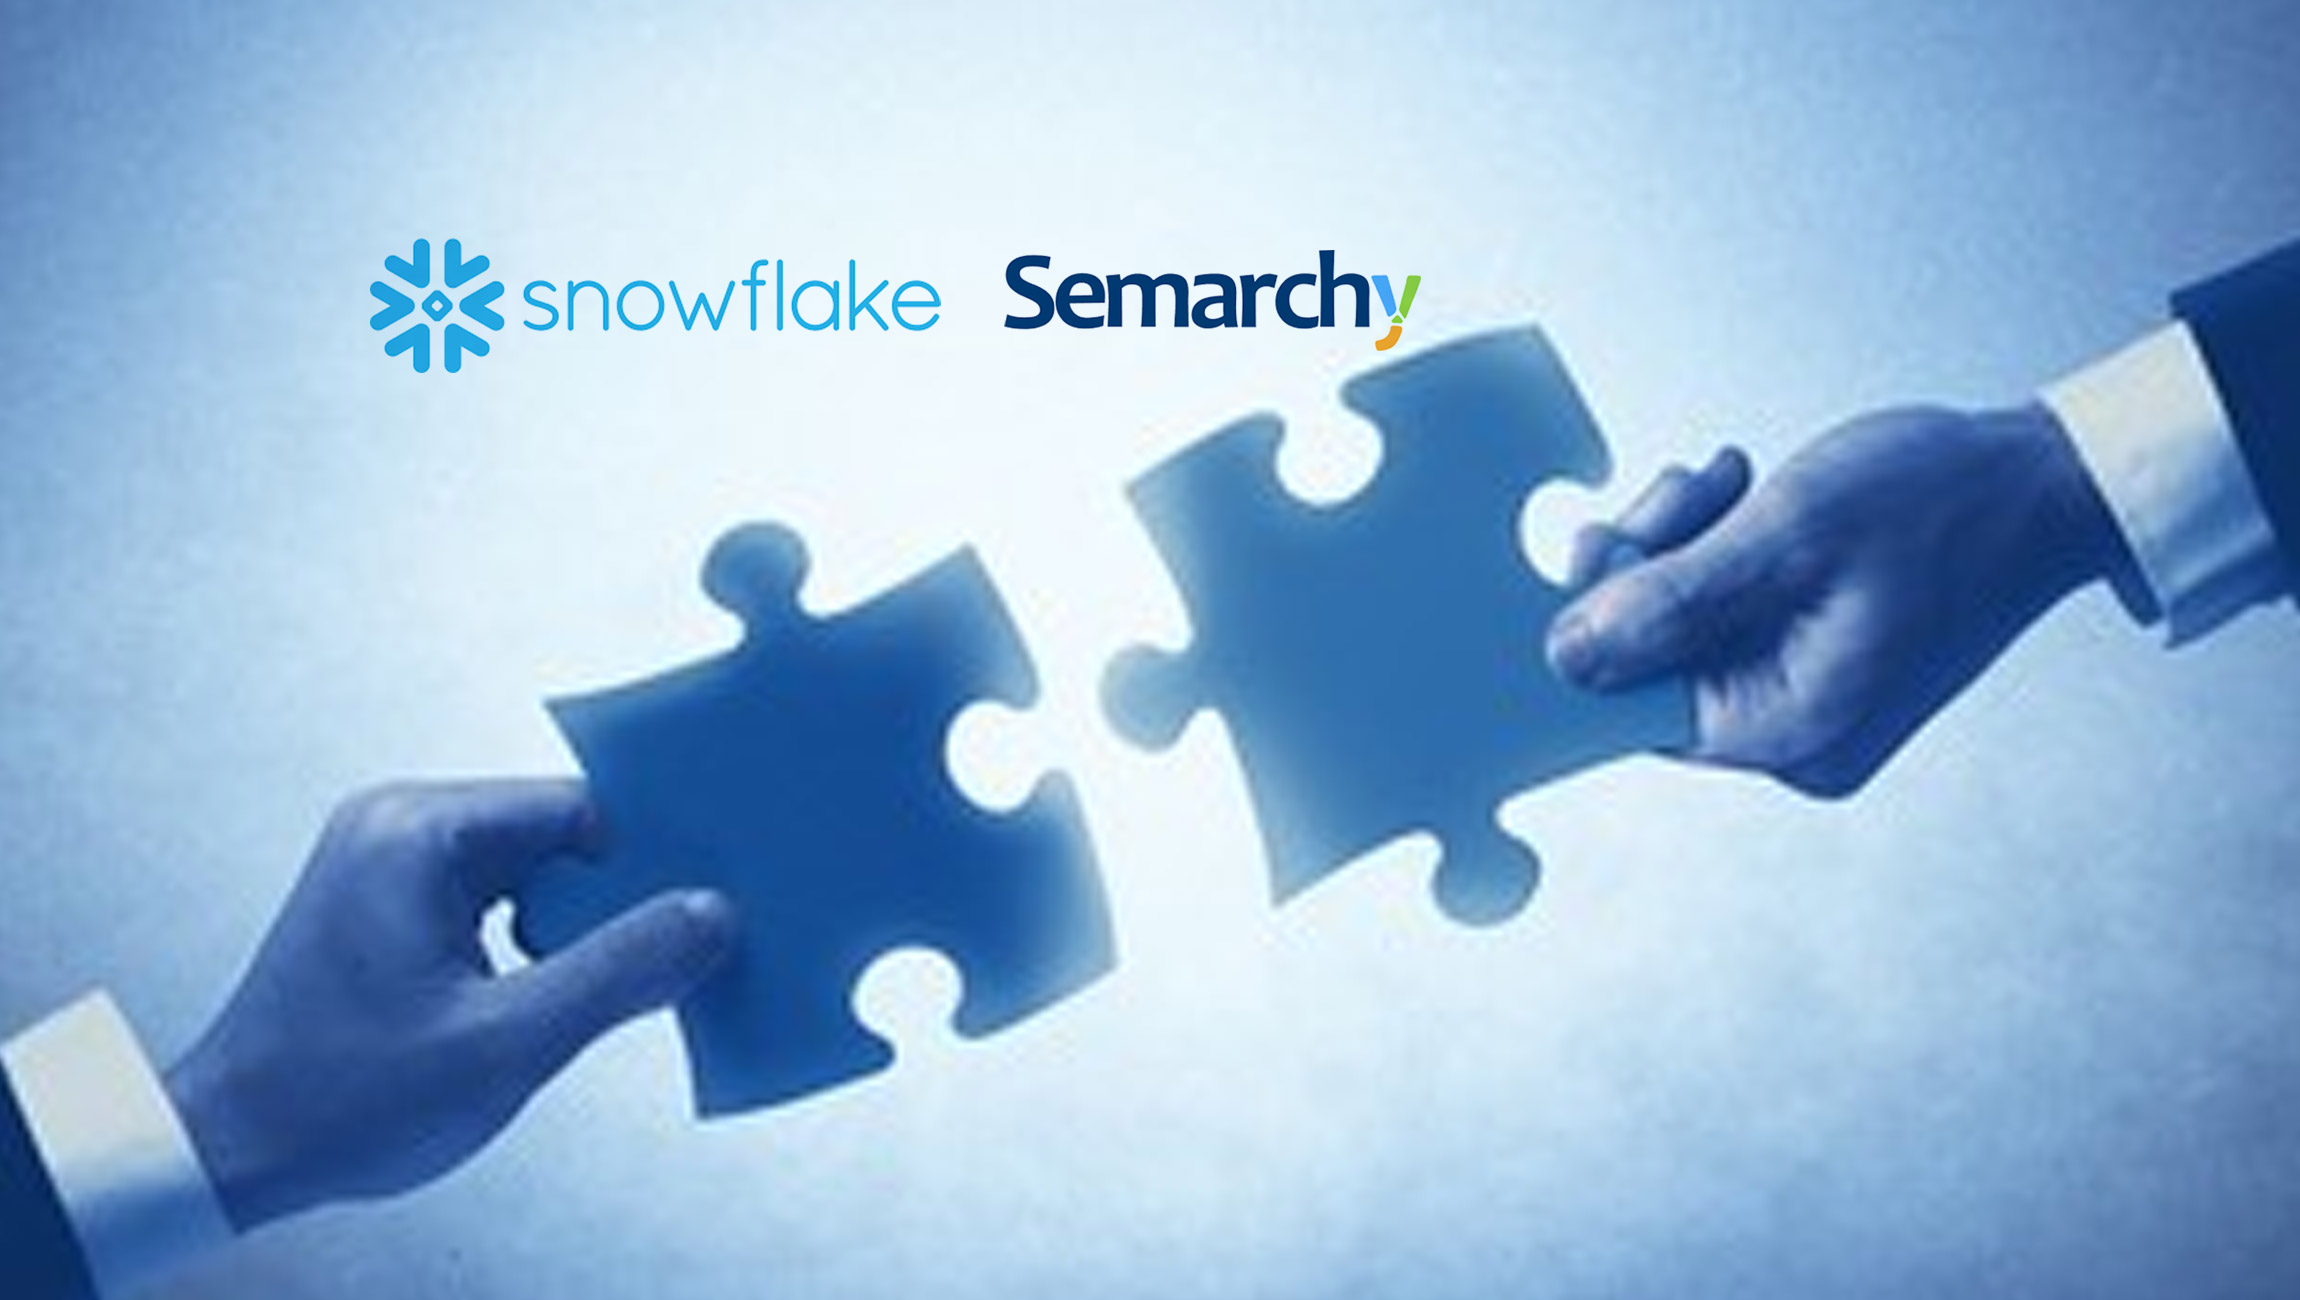 Snowflake Users Get Performance Upgrade with Semarchy Integration ConnectorSnowflake Users Get Performance Upgrade with Semarchy Integration Connector